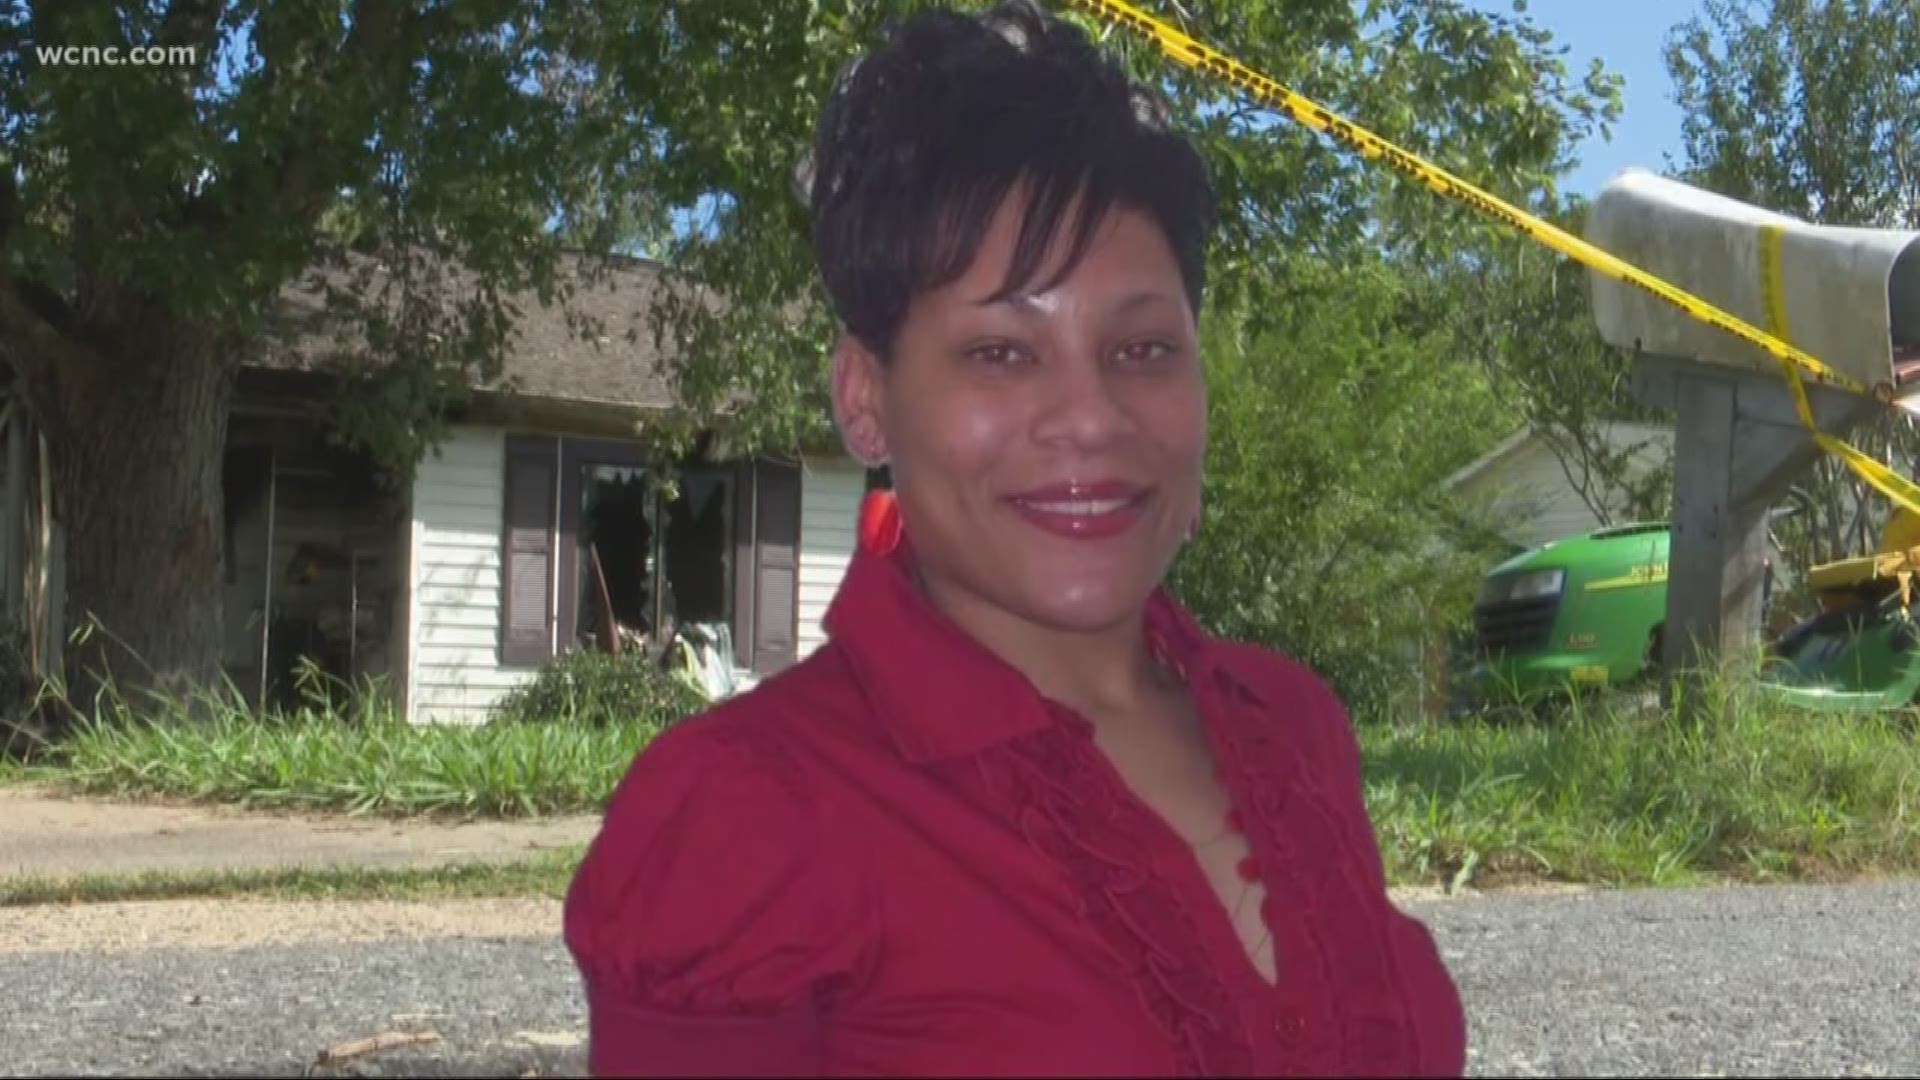 A mother of five was killed early Saturday morning during a house fire that also injured her husband and three of her five children.